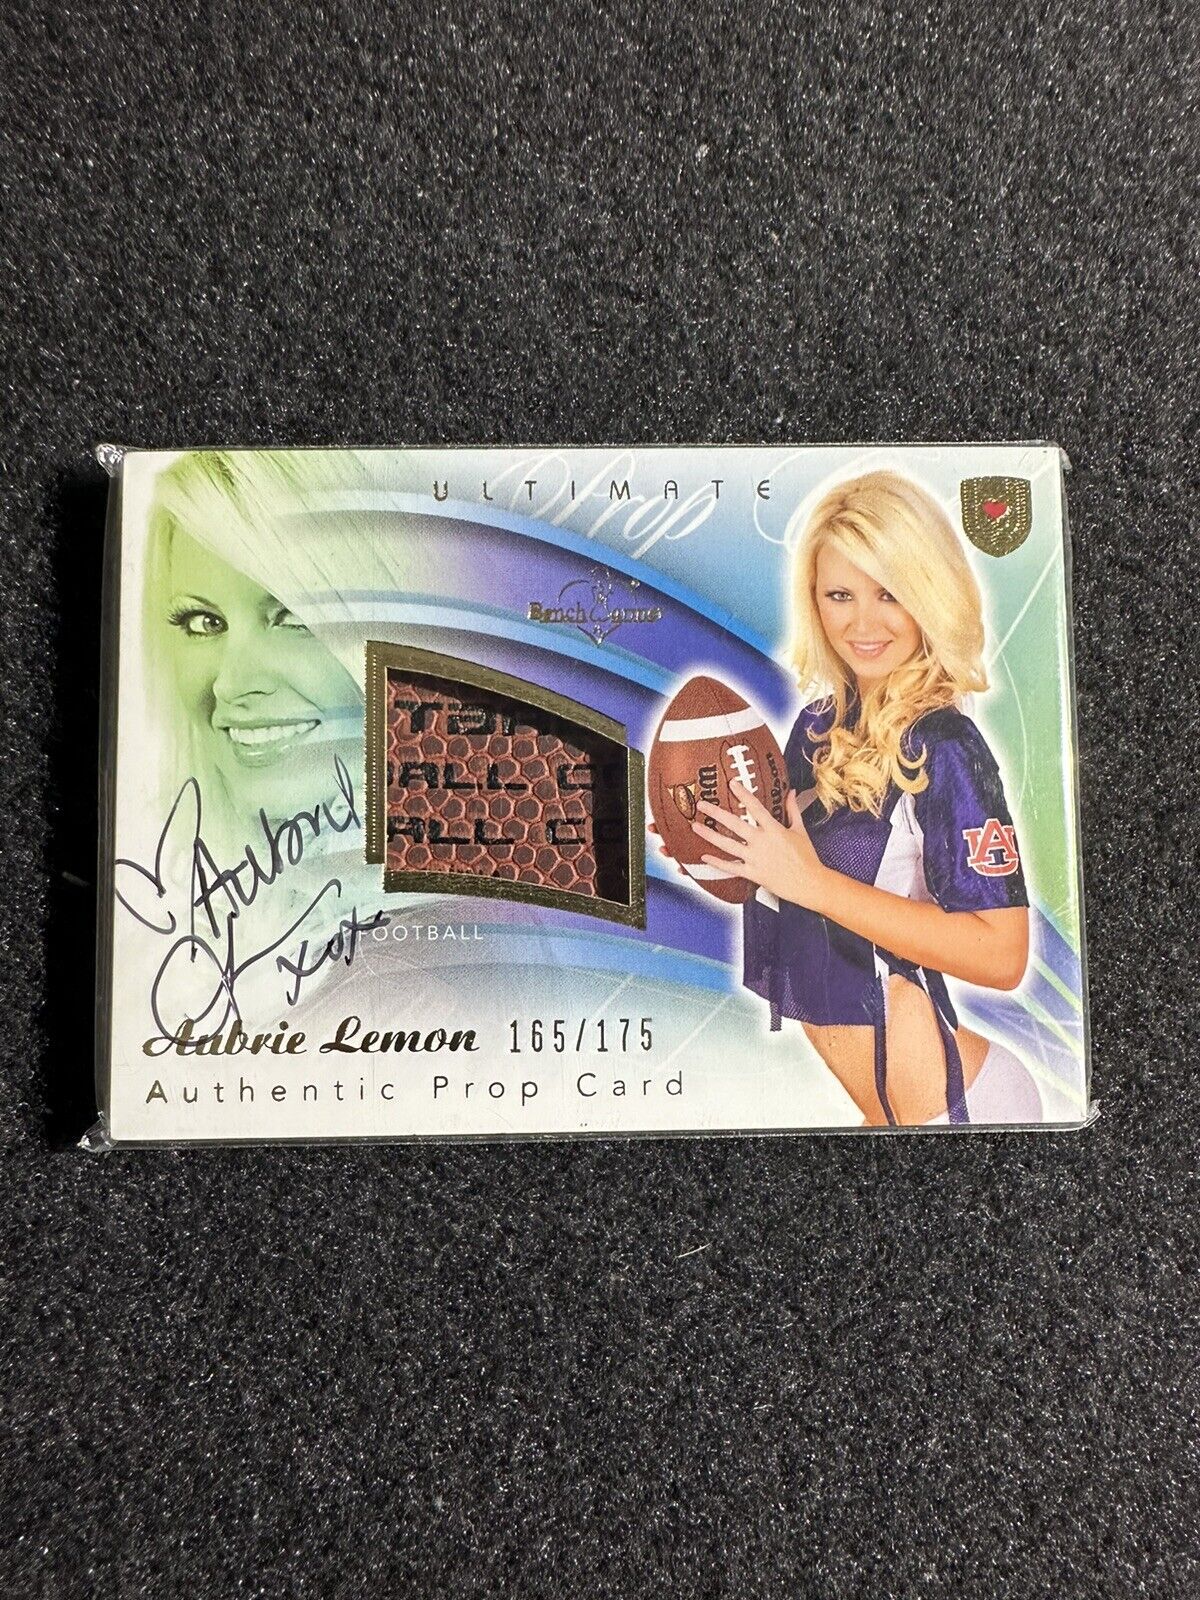 2009 BENCHWARMER Ultimate Football Authentic Prop Card Aubrie Lemon Auto SN/ 175